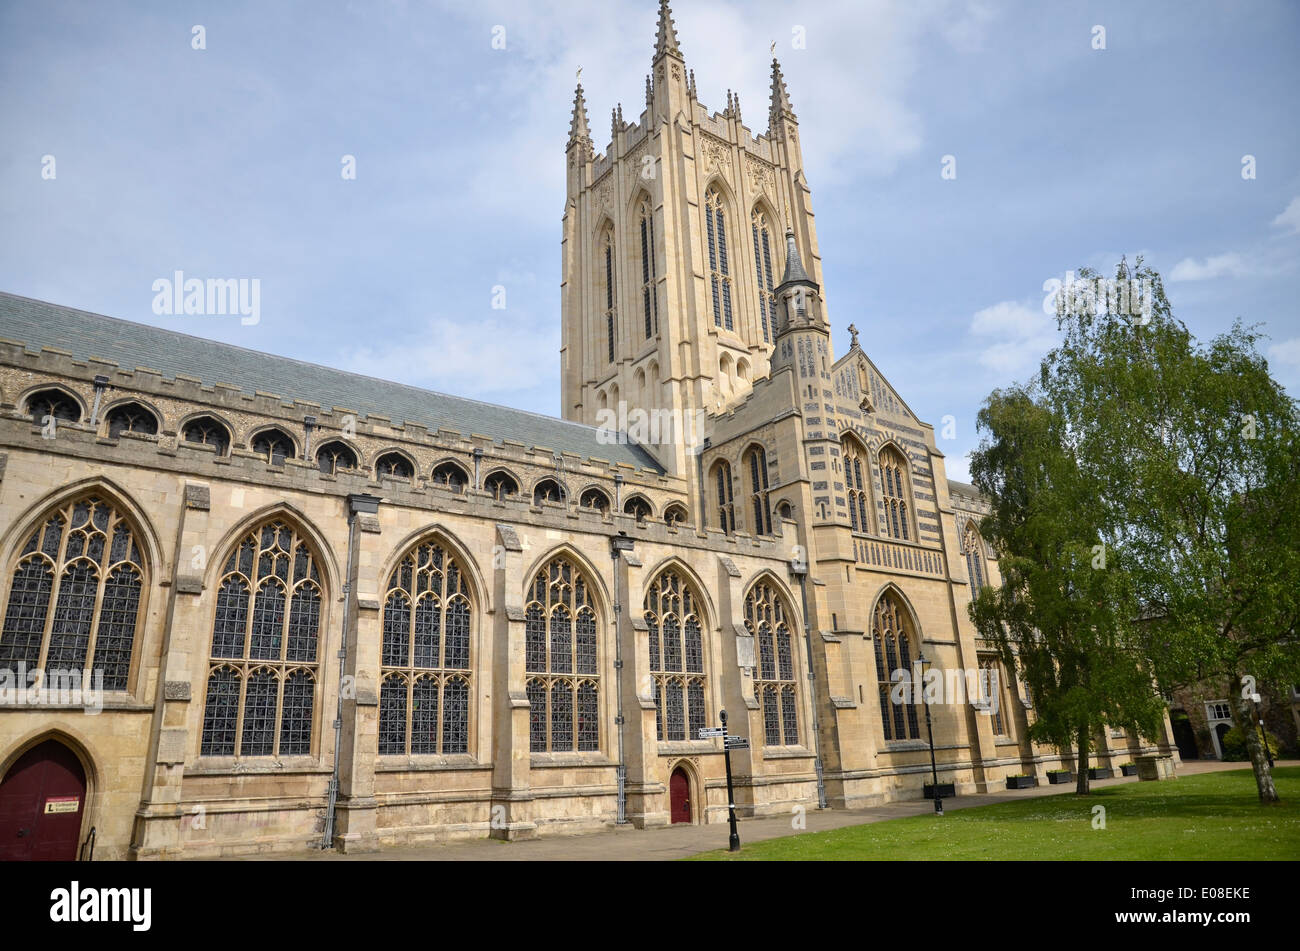 St Edmundsbury Cathedral in Bury St Edmunds, Suffolk, Inghilterra Foto Stock